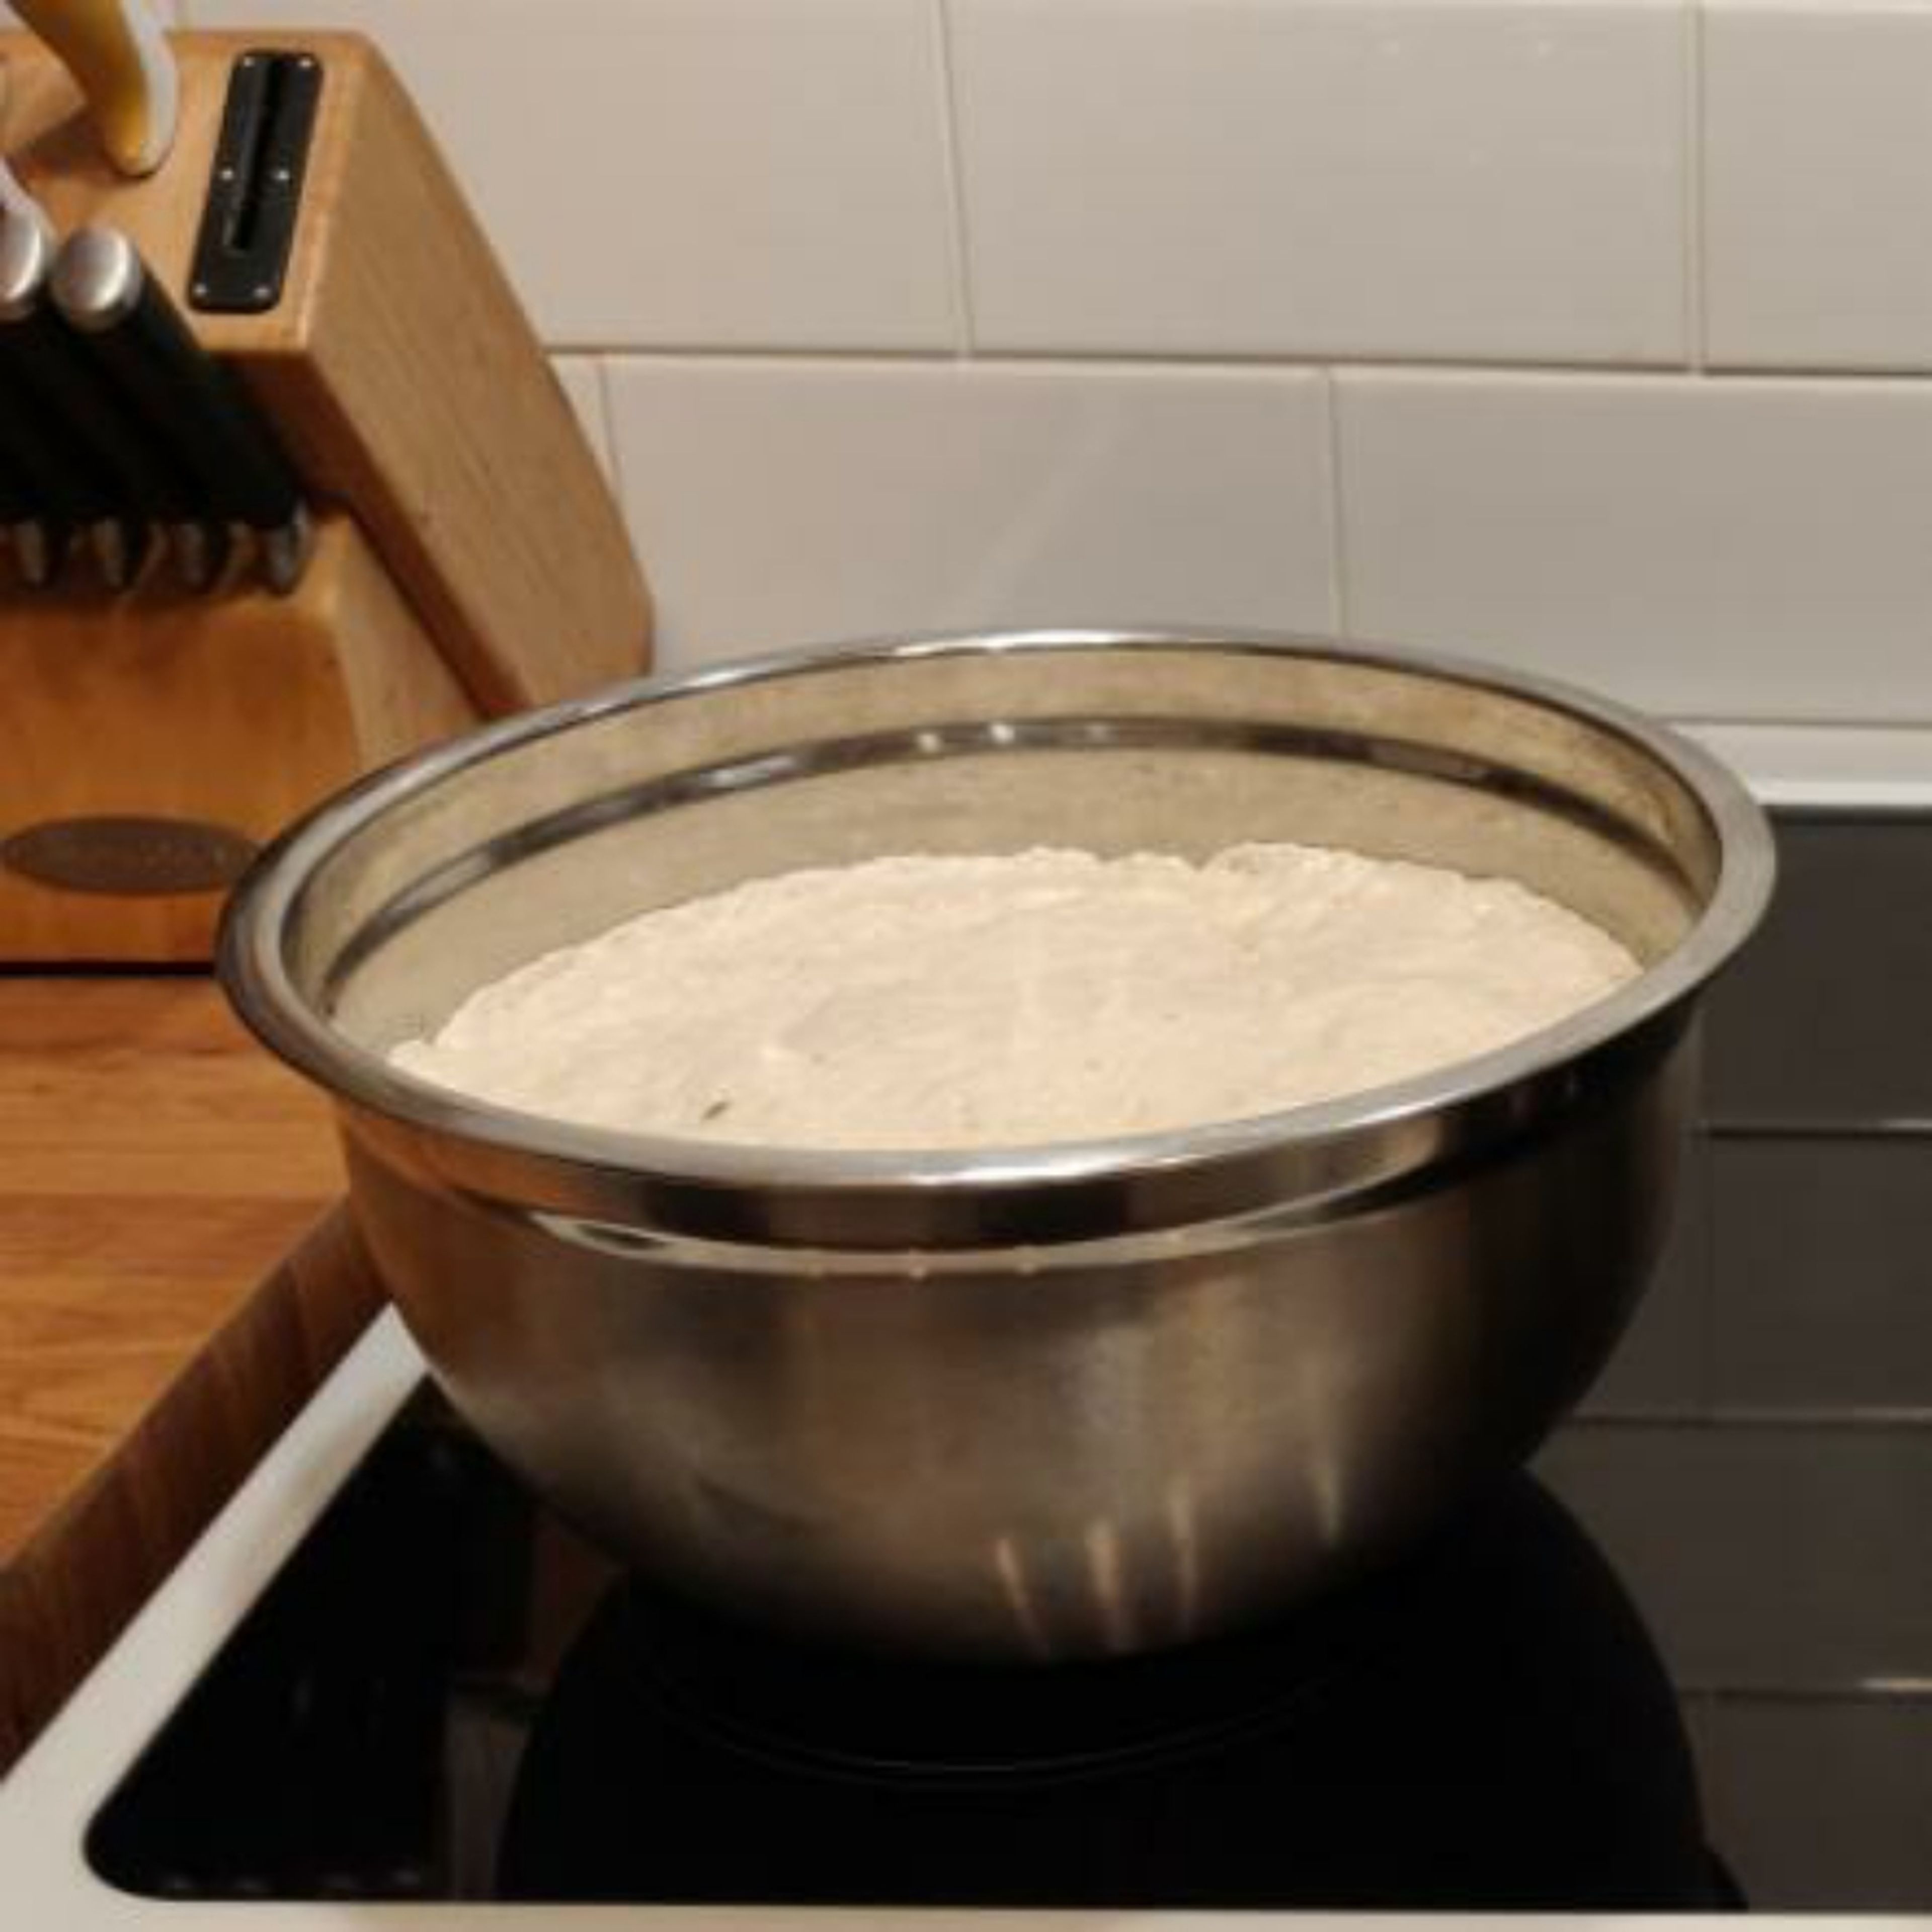 form the dough into a ball and place ie to a well oiled bowl. cover the bowl with cling film/plastic wrap and leave in a warm place for 1-2 hours.